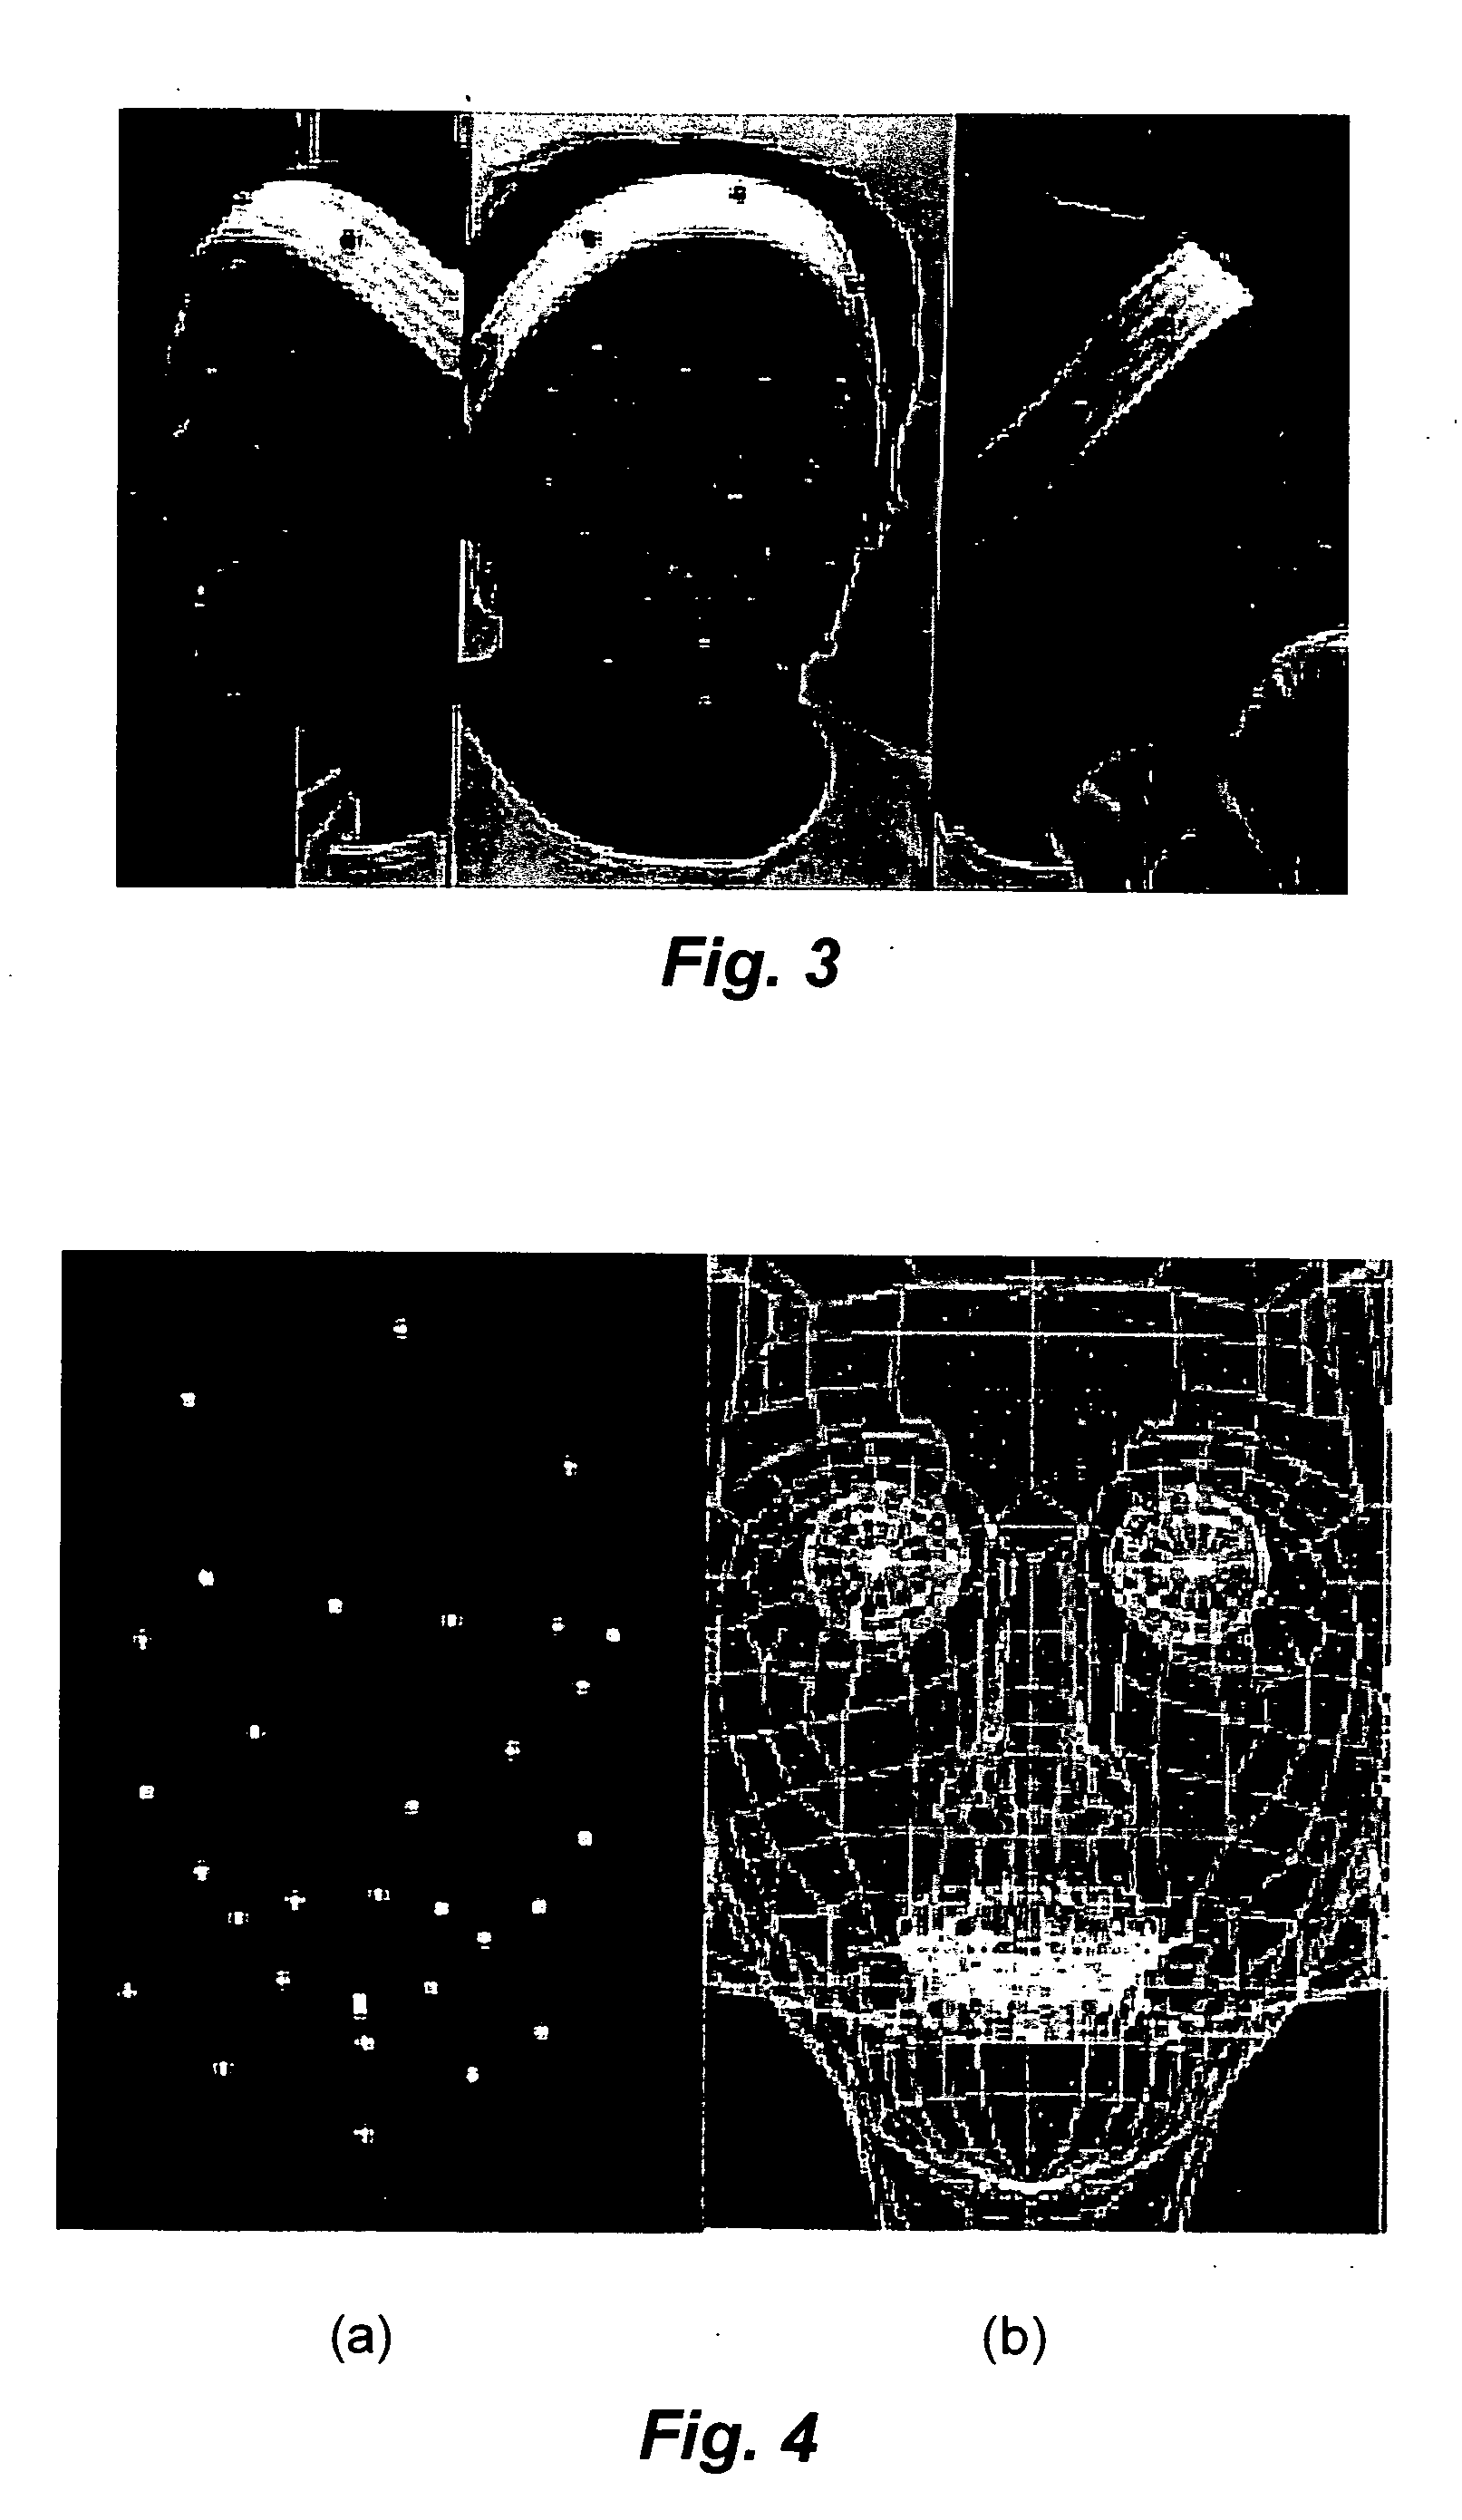 Methods and systems for synthesis of accurate visible speech via transformation of motion capture data